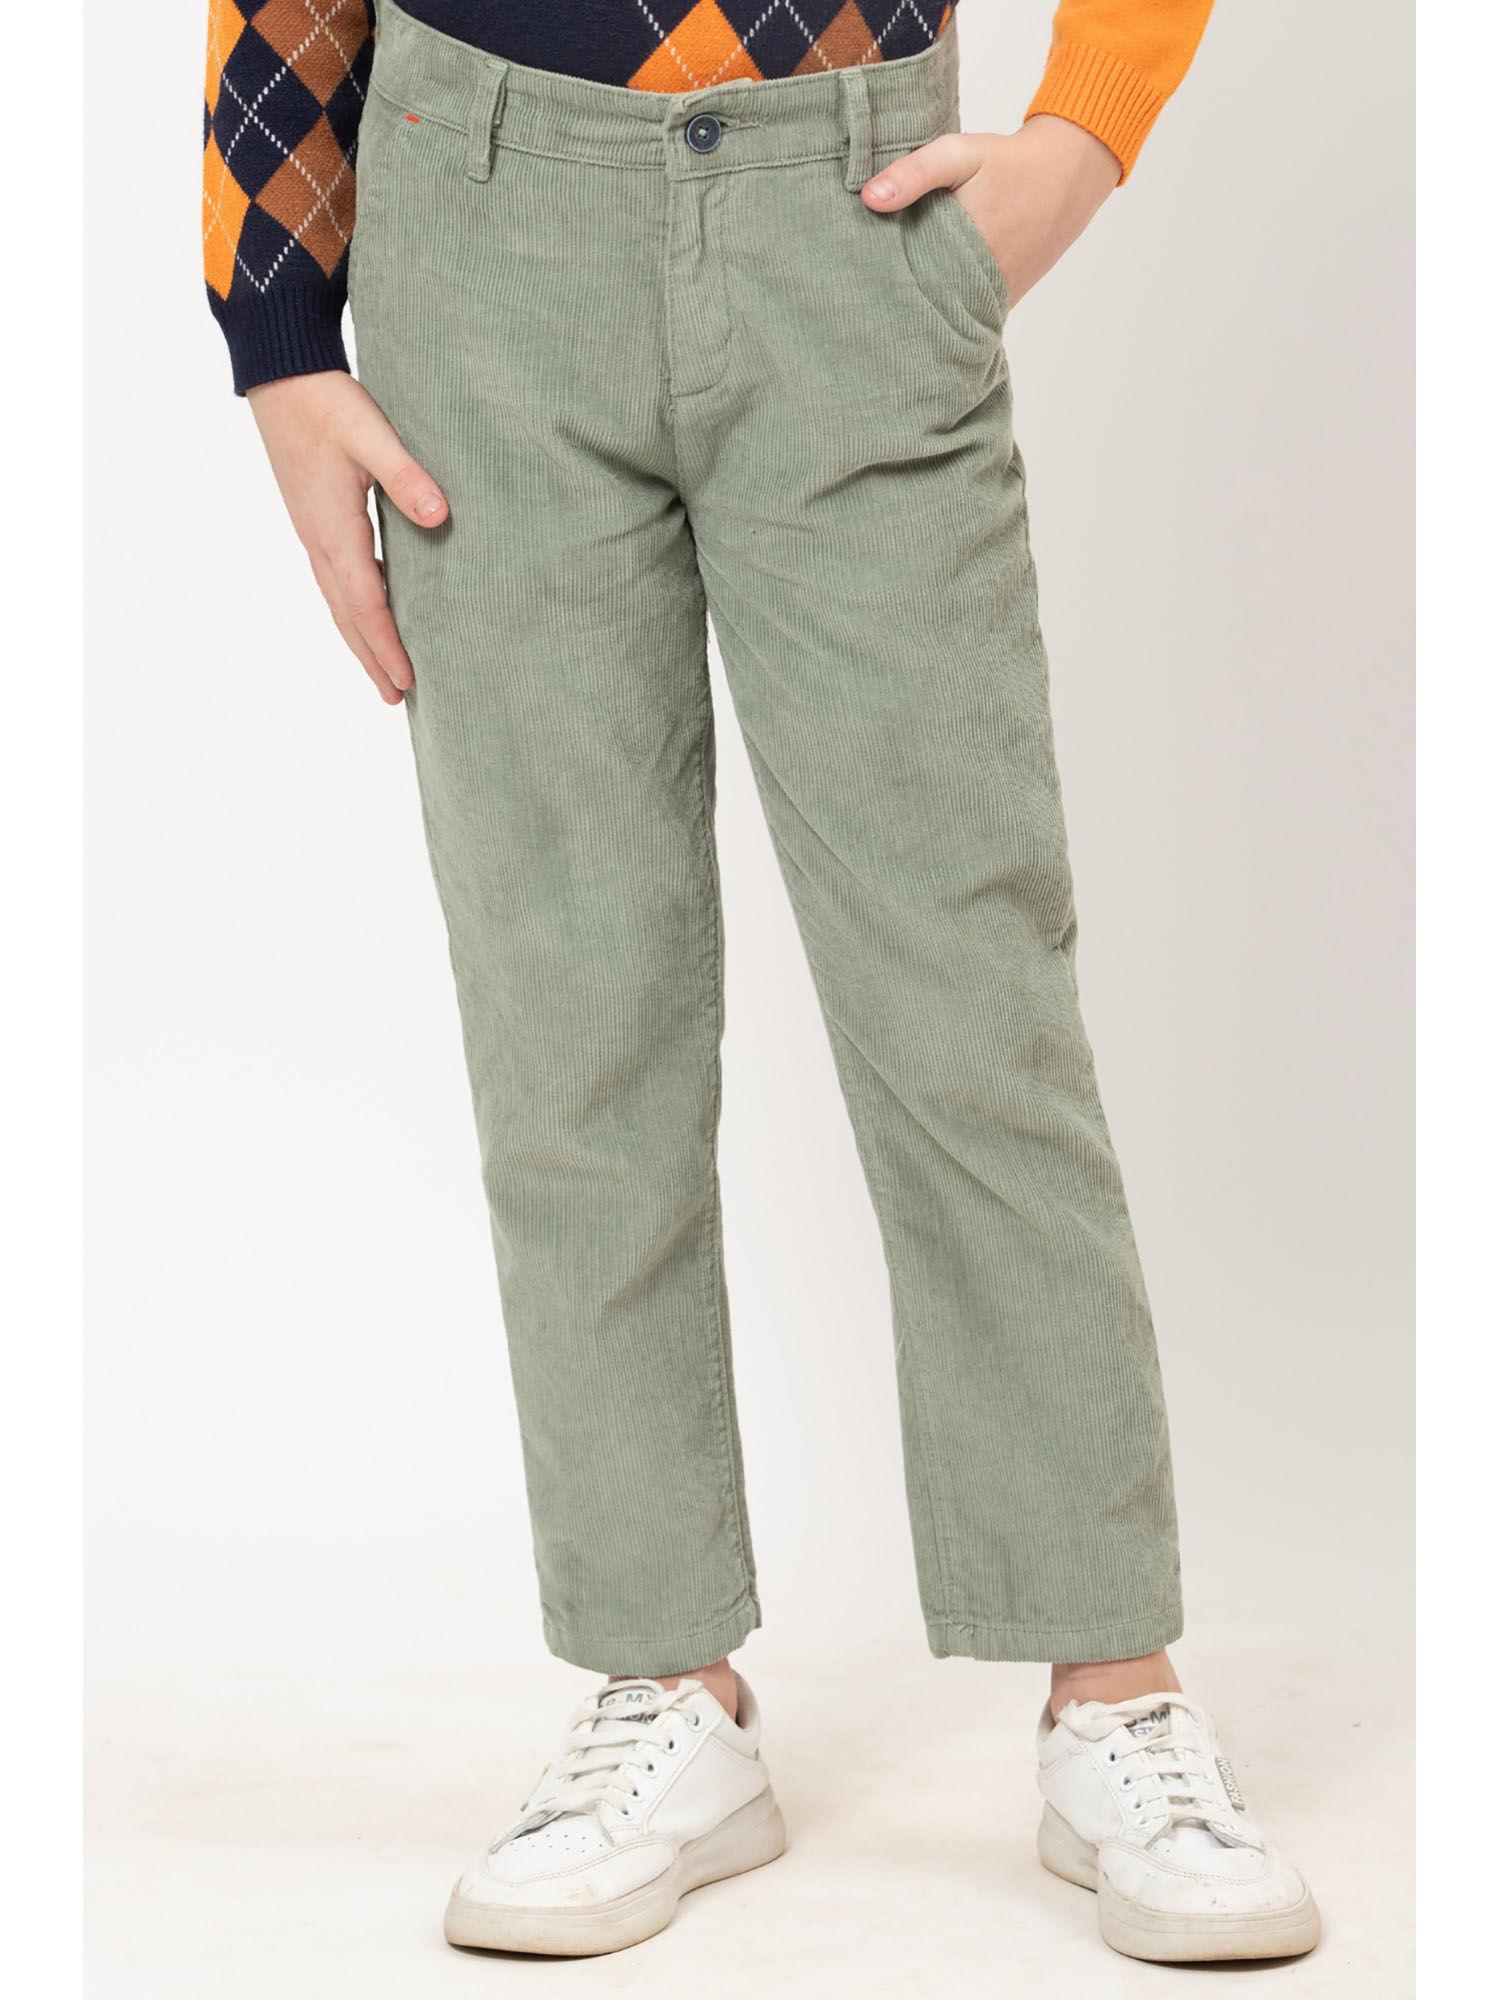 varsity-chic-sage-green-adventure-trousers-for-boys